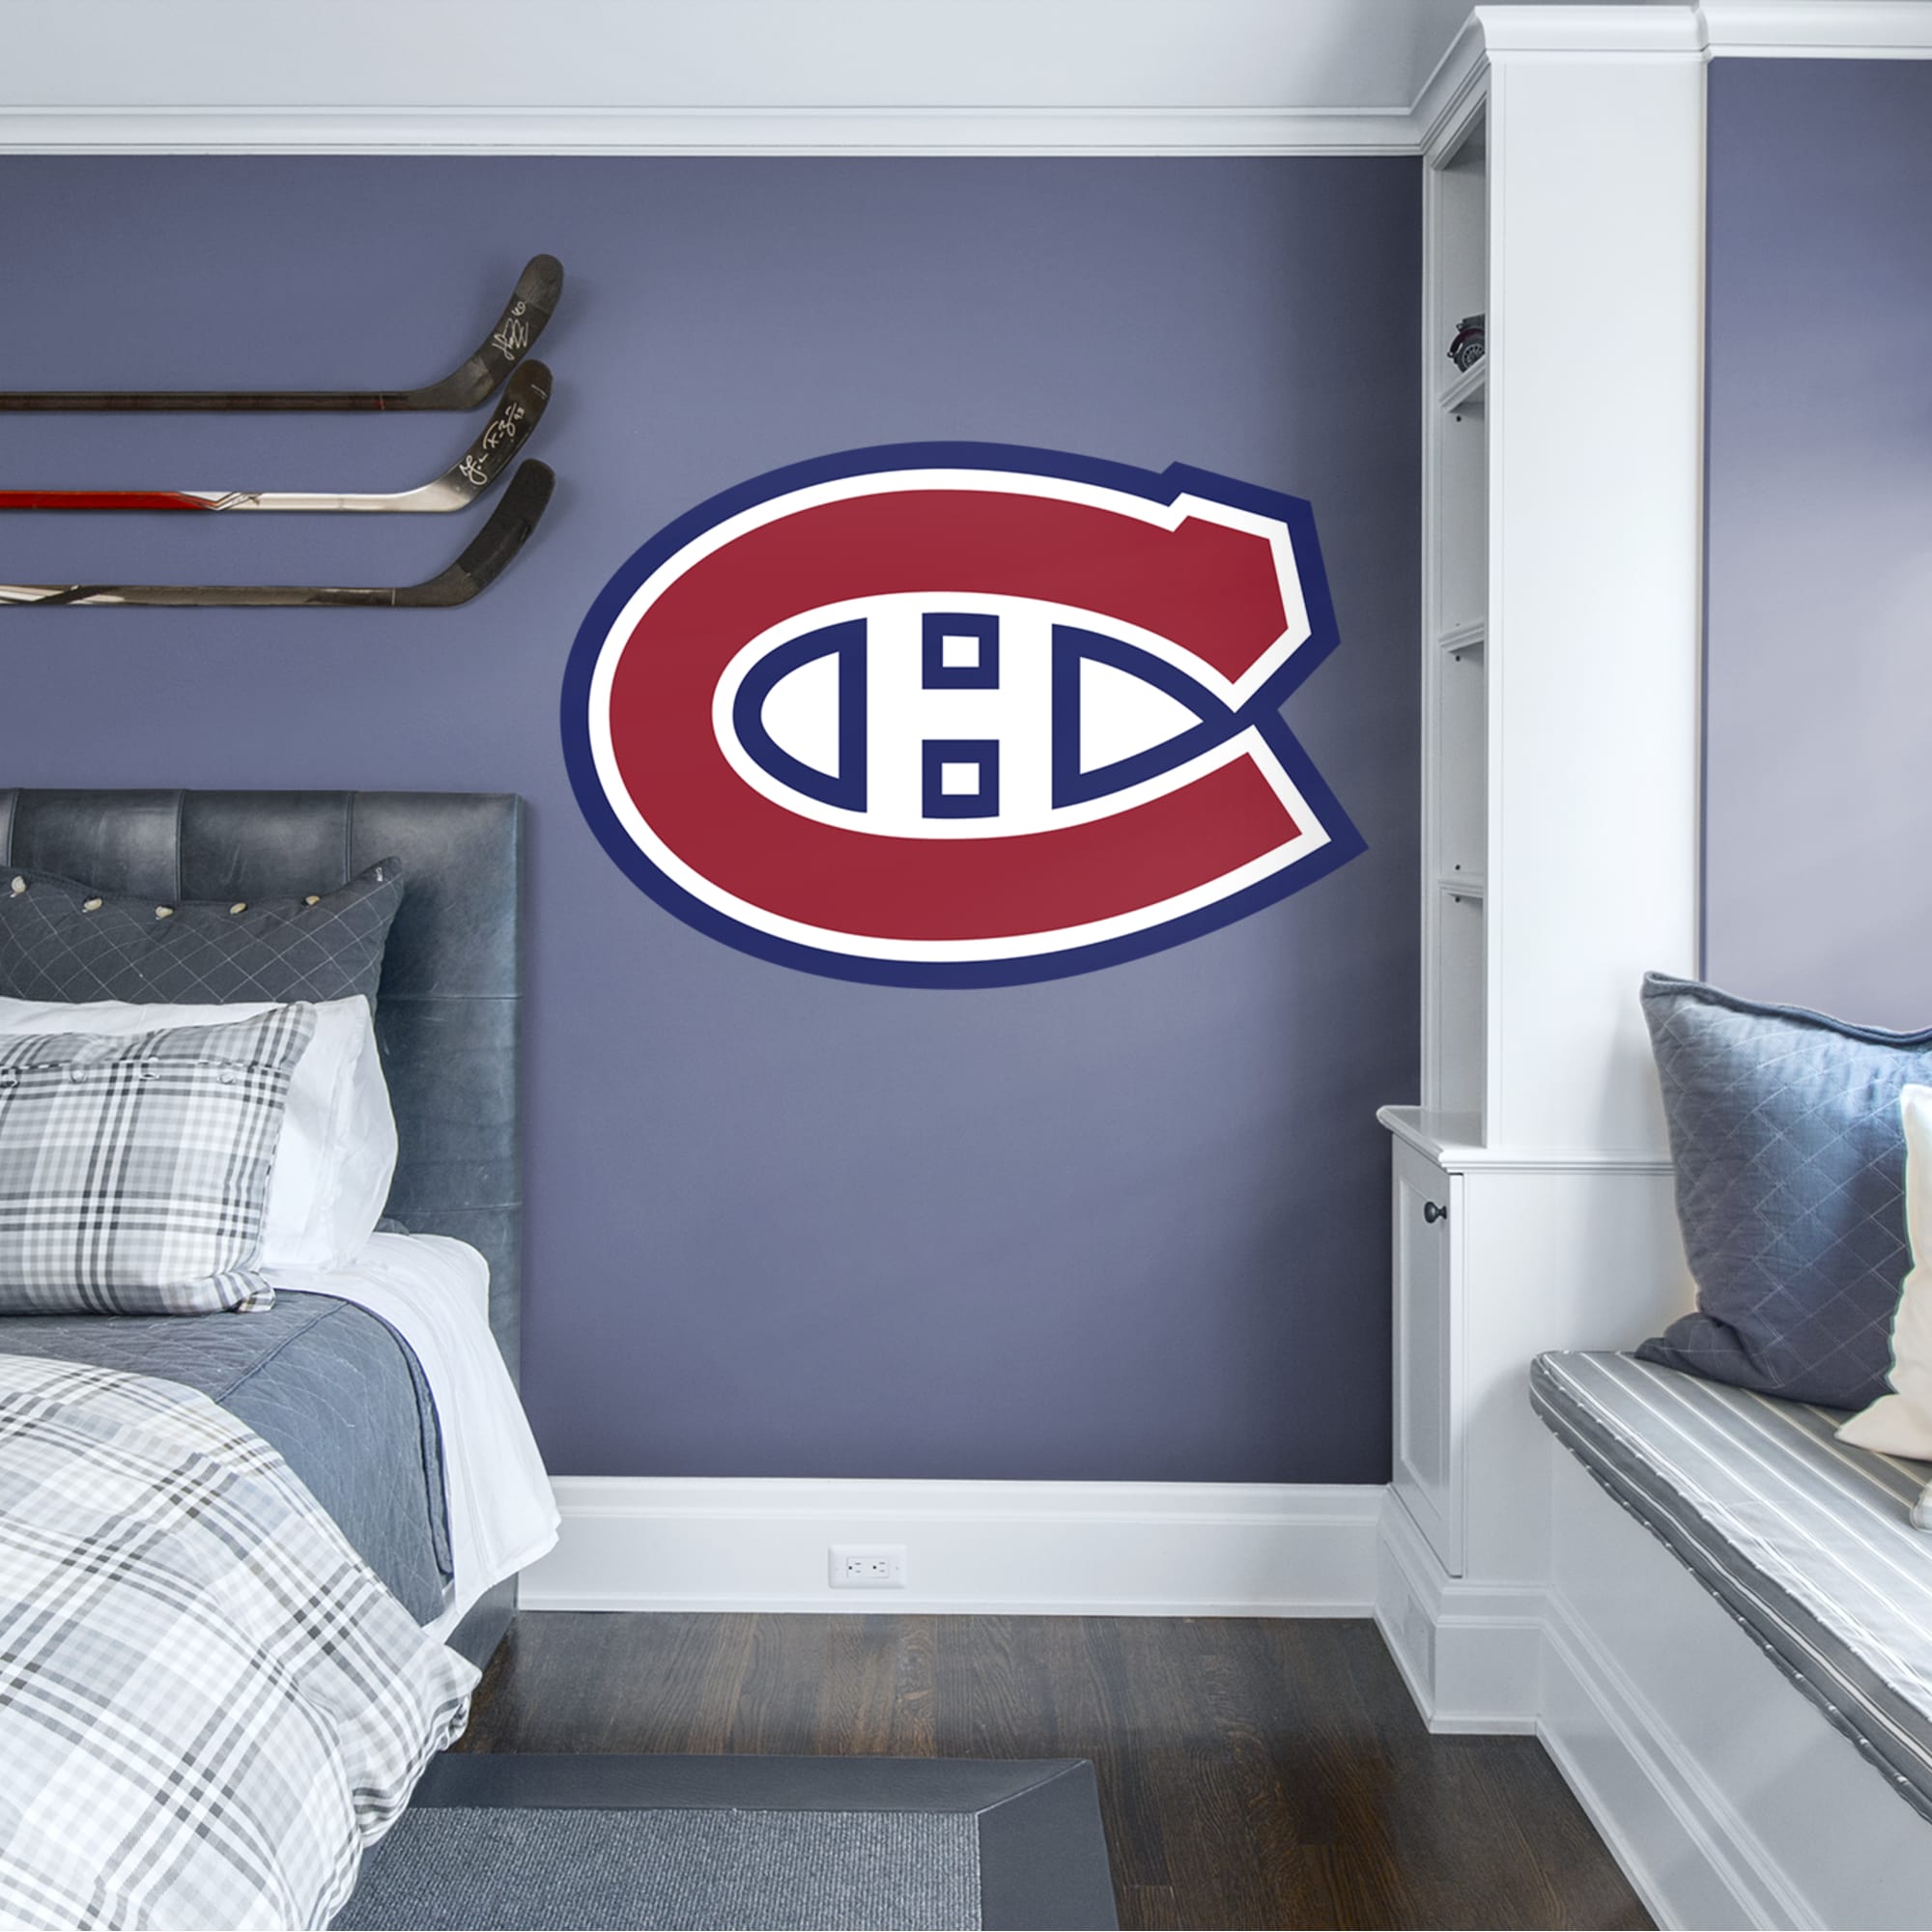 Montreal Canadiens: Logo - Officially Licensed NHL Removable Wall Decal Giant Logo (51"W x 34"H) by Fathead | Vinyl